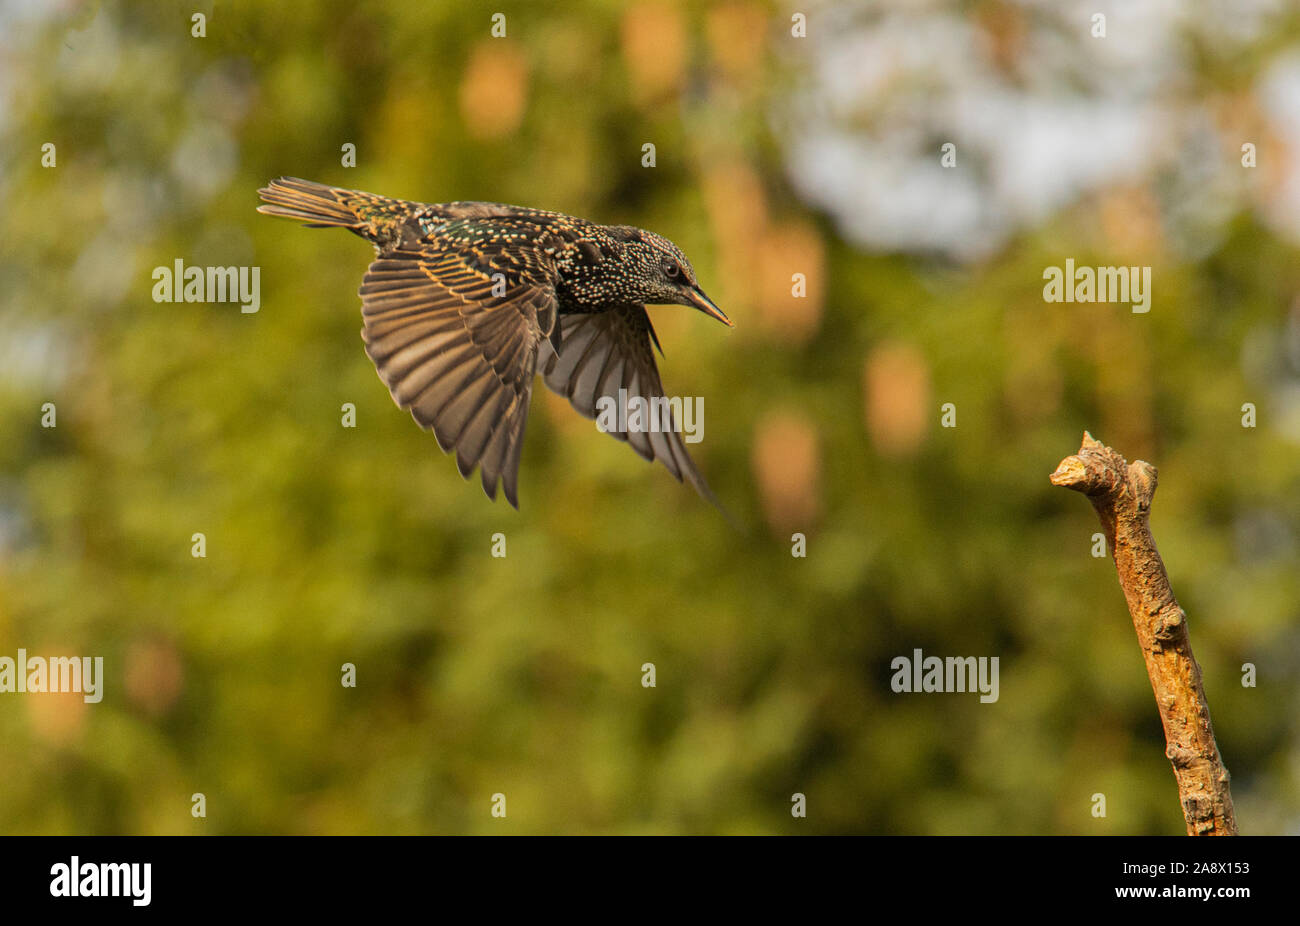 Starling in Flight, United Kingdom Bedfordshire, blue sky and colourful feathers in November 2019 Stock Photo